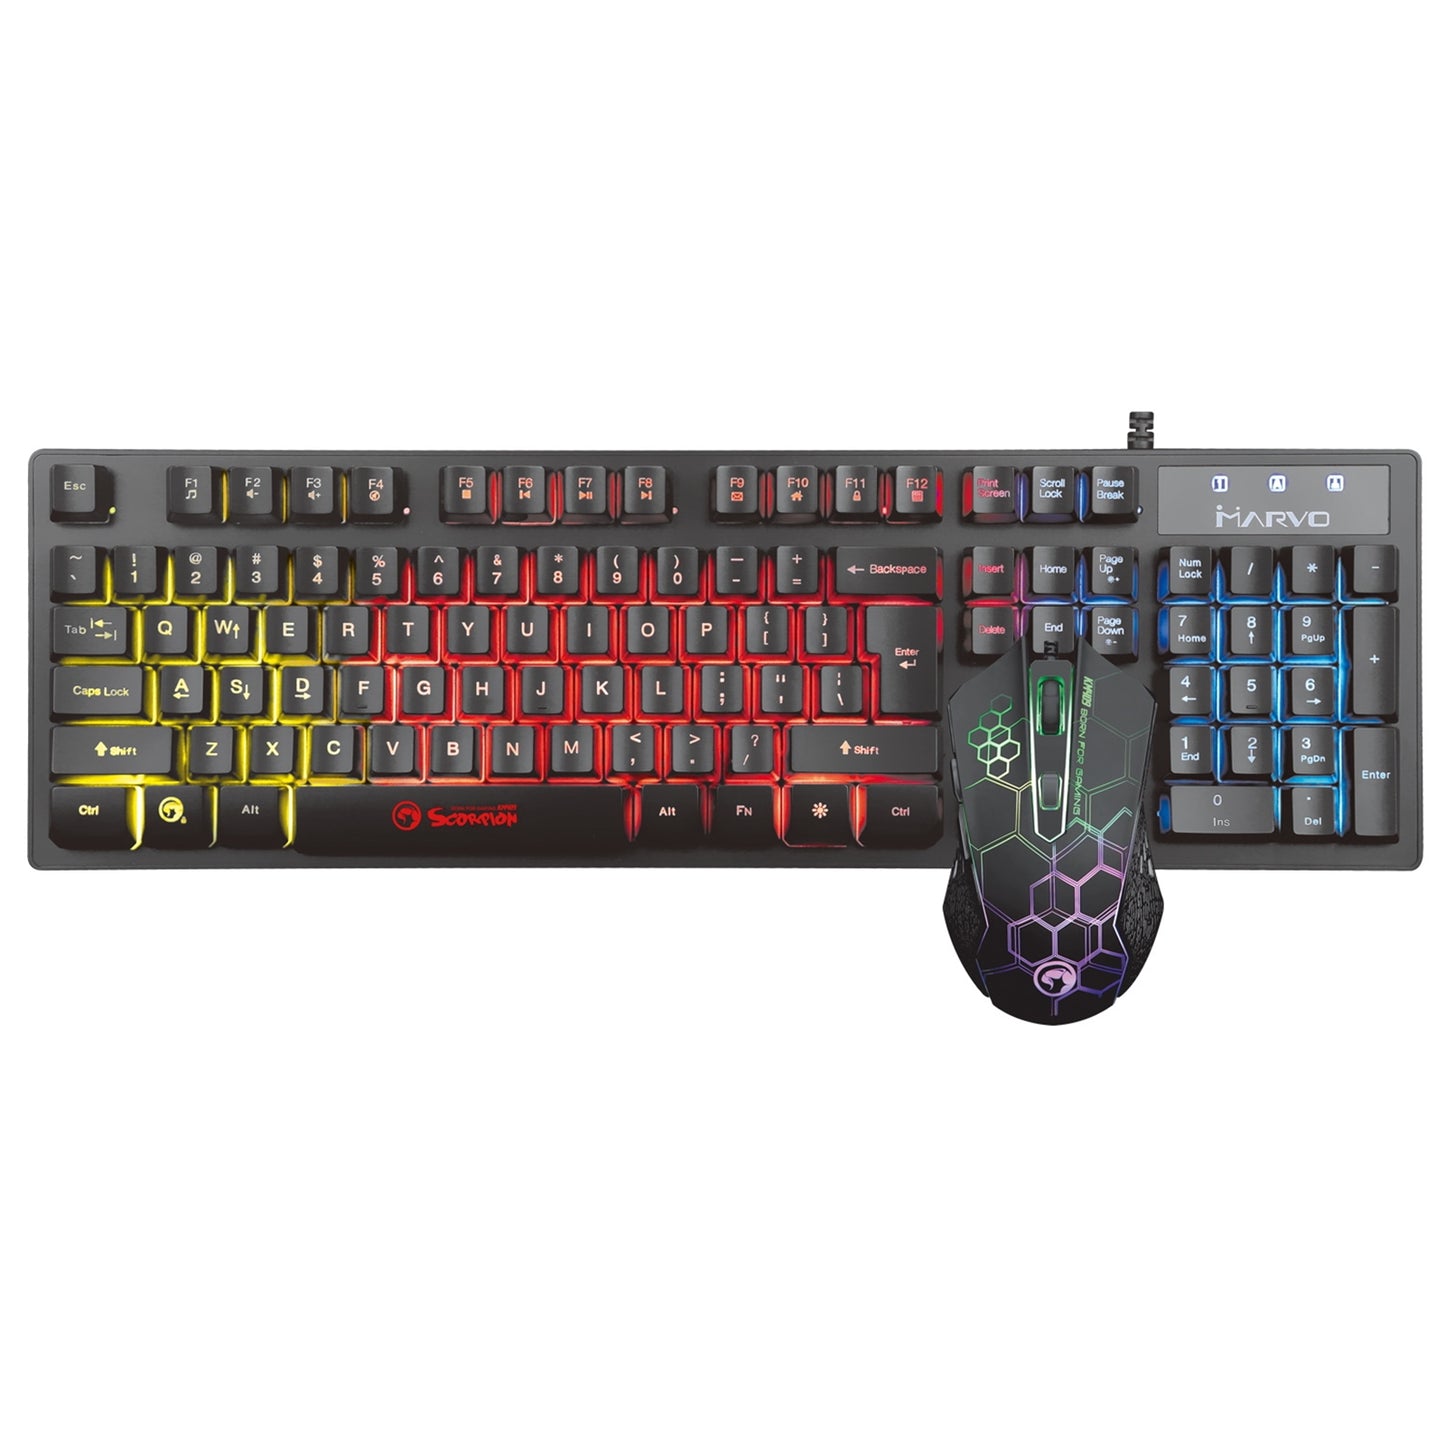 Marvo Scorpion Gaming Keyboard and Mouse Bundle, 7 Colour LED Backlit, USB 2.0, Compact Design, Mouse with Adjustable dpi